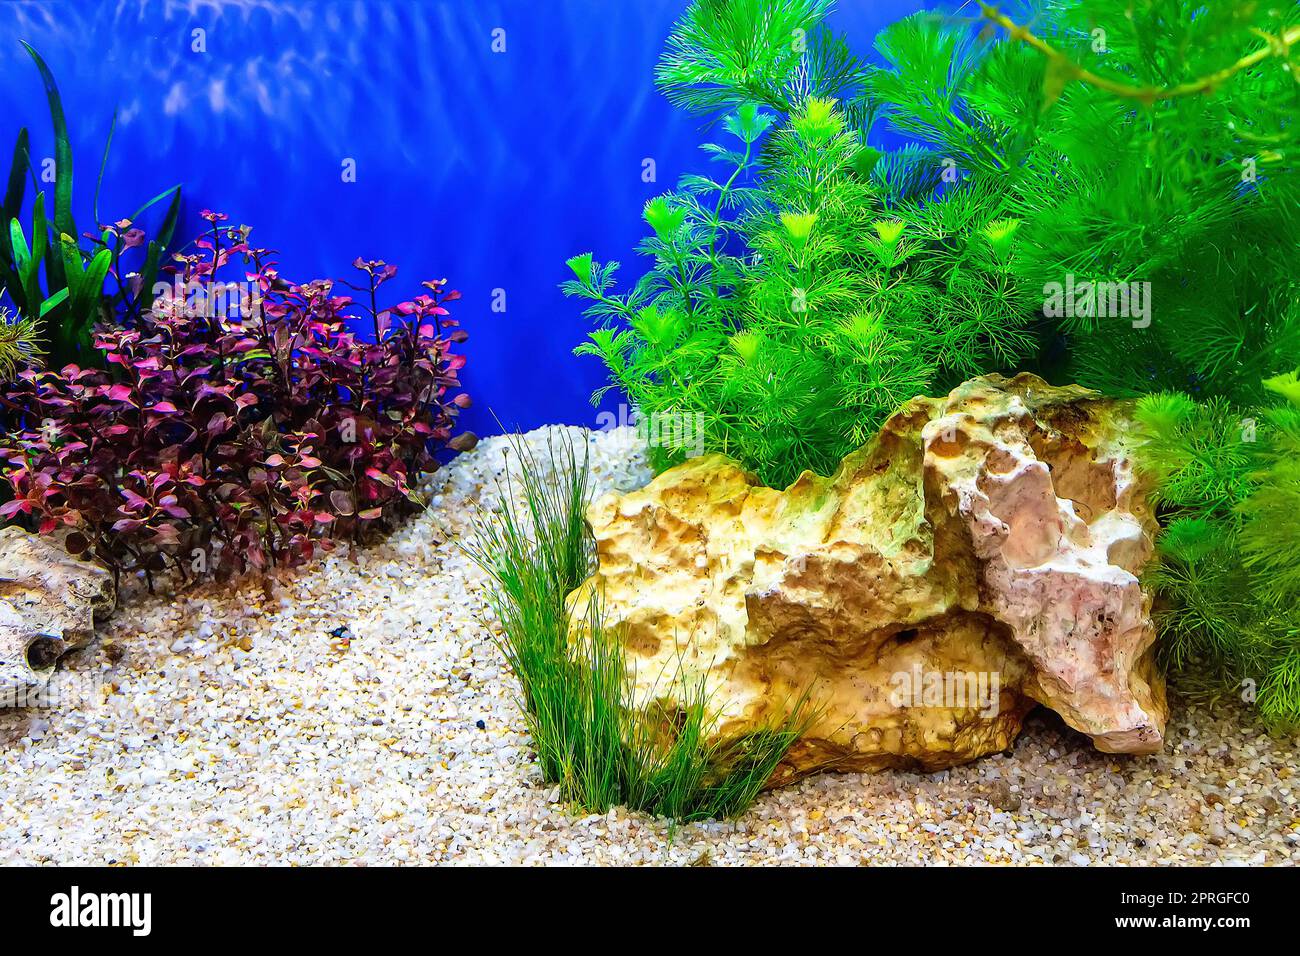 Underwater landscape nature forest style aquarium tank with a